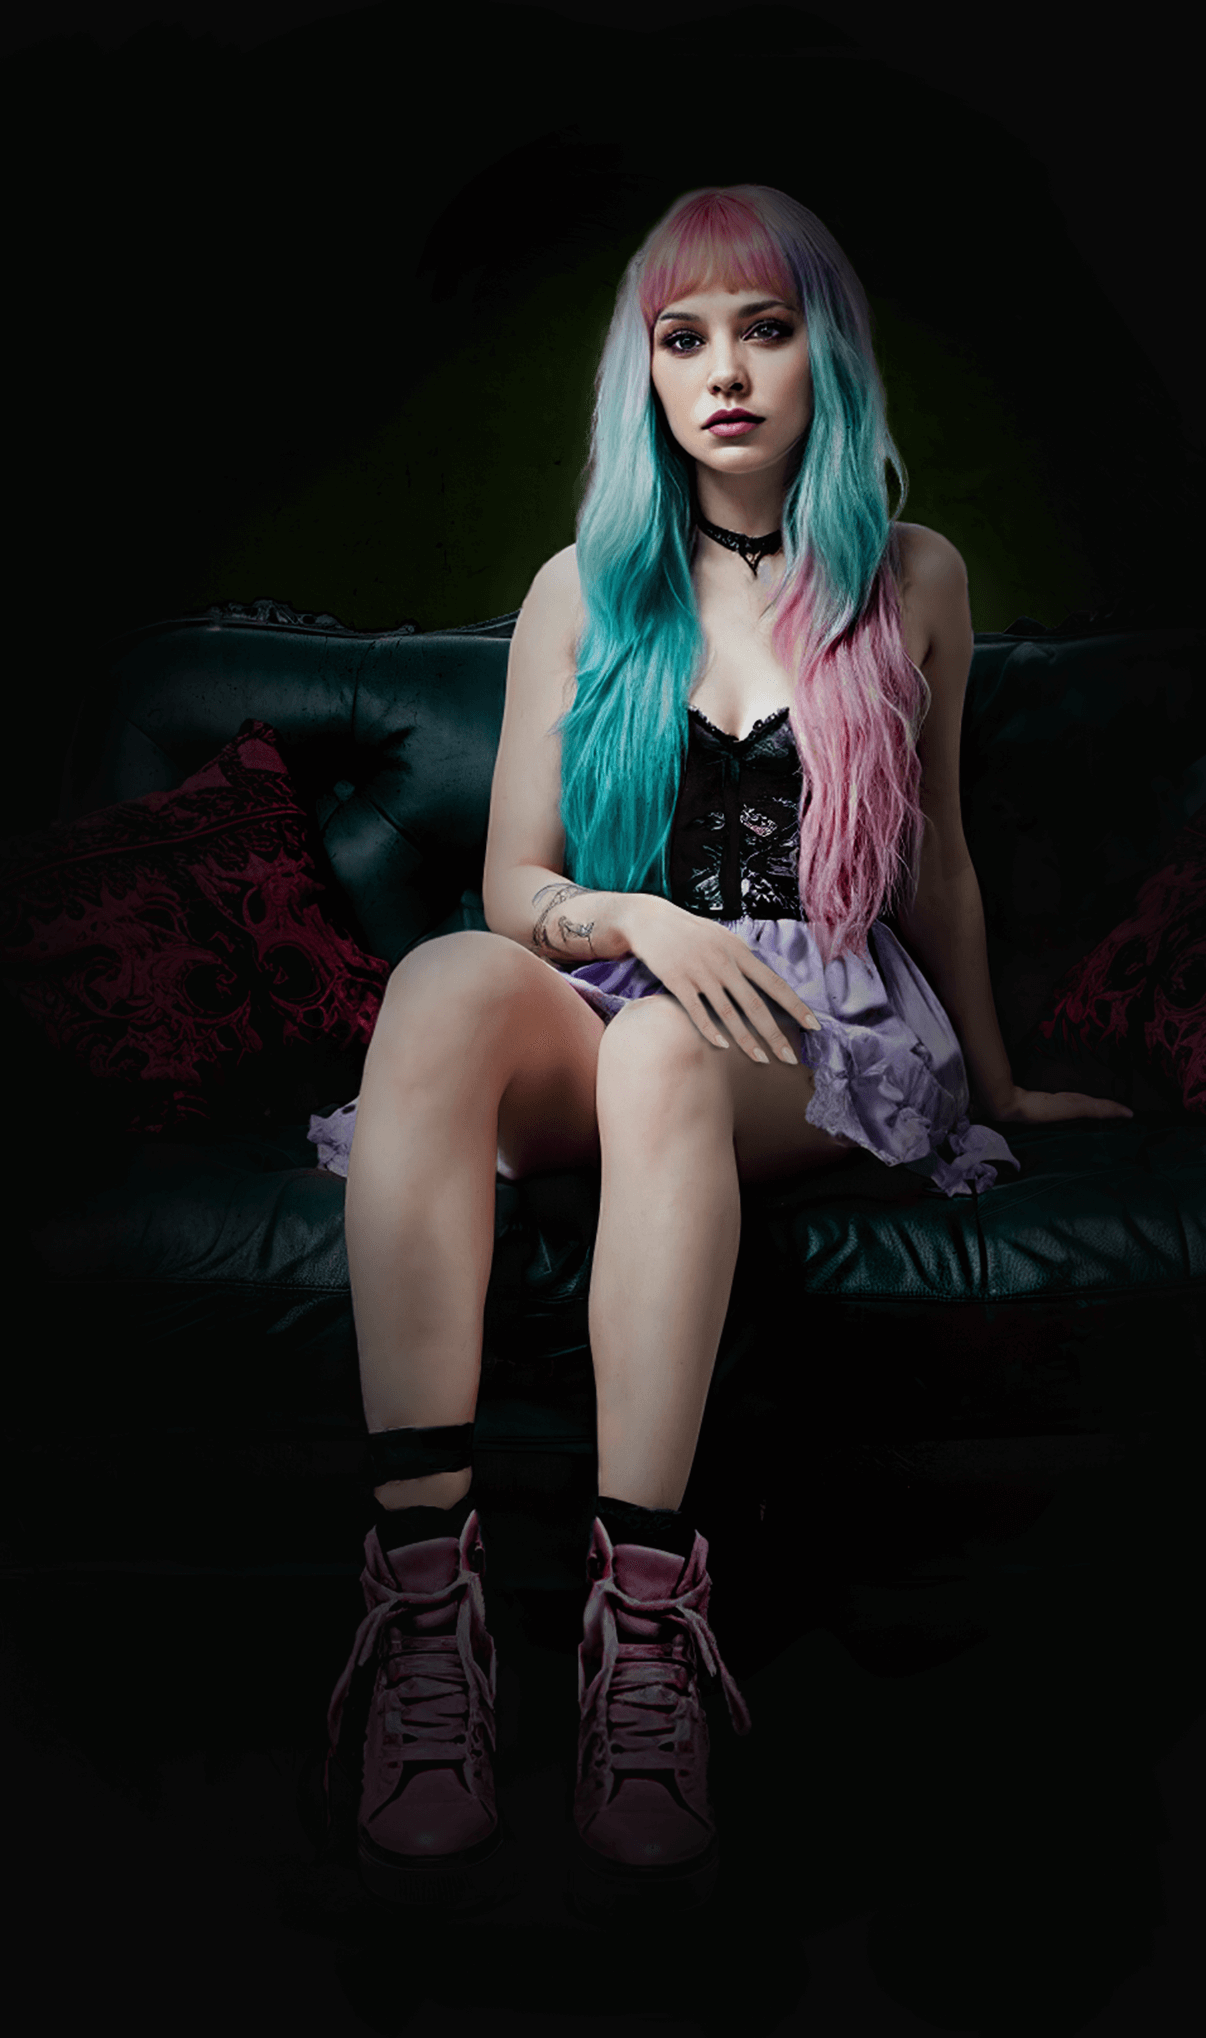 Woman with pink hair sits on couch in a gothic setting